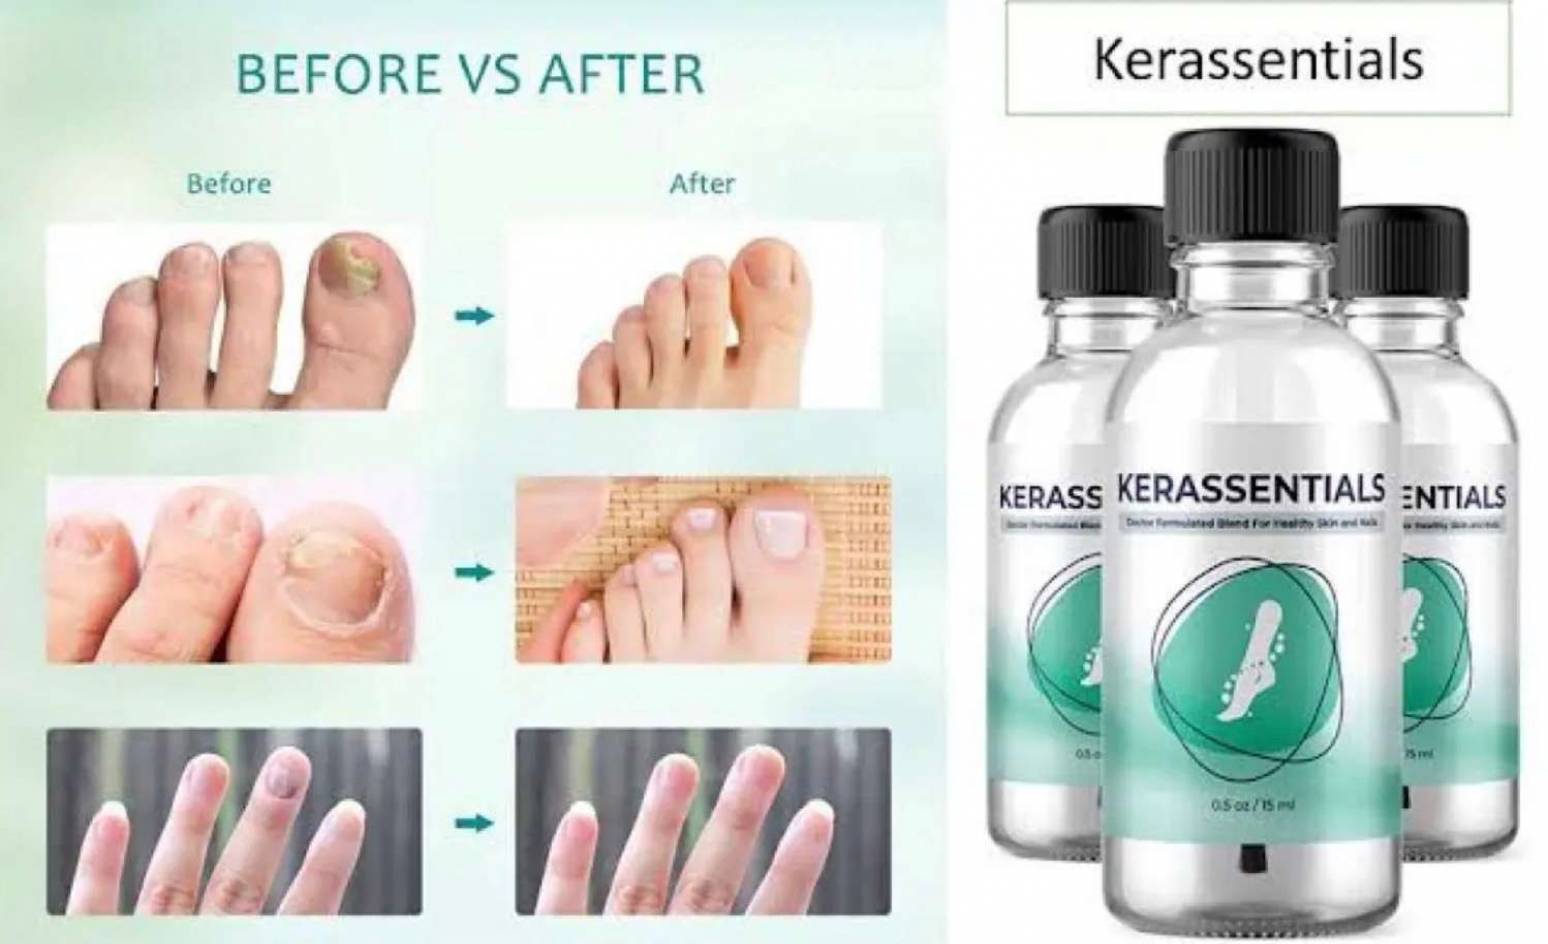 How To Use Kerassentials